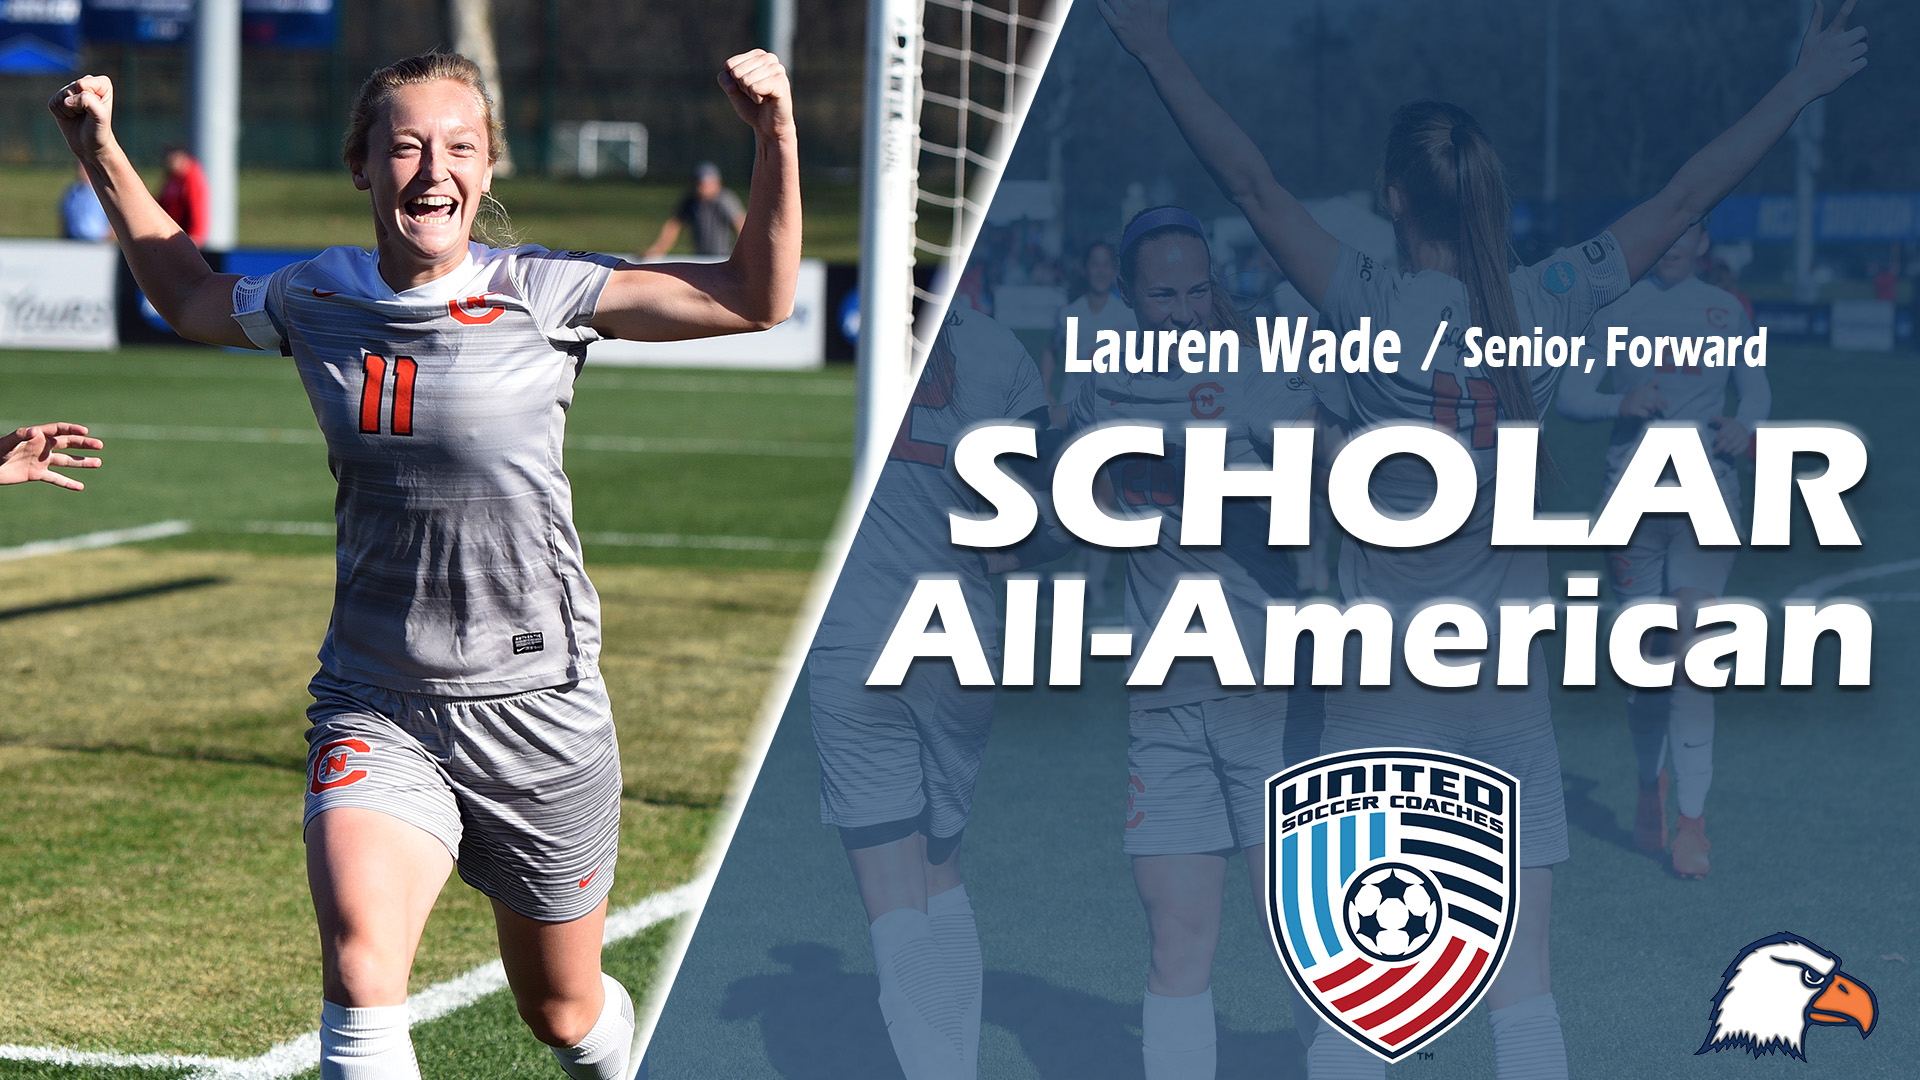 Eagles claim three spots on USC Scholar All-American teams, Wade named Player of the Year